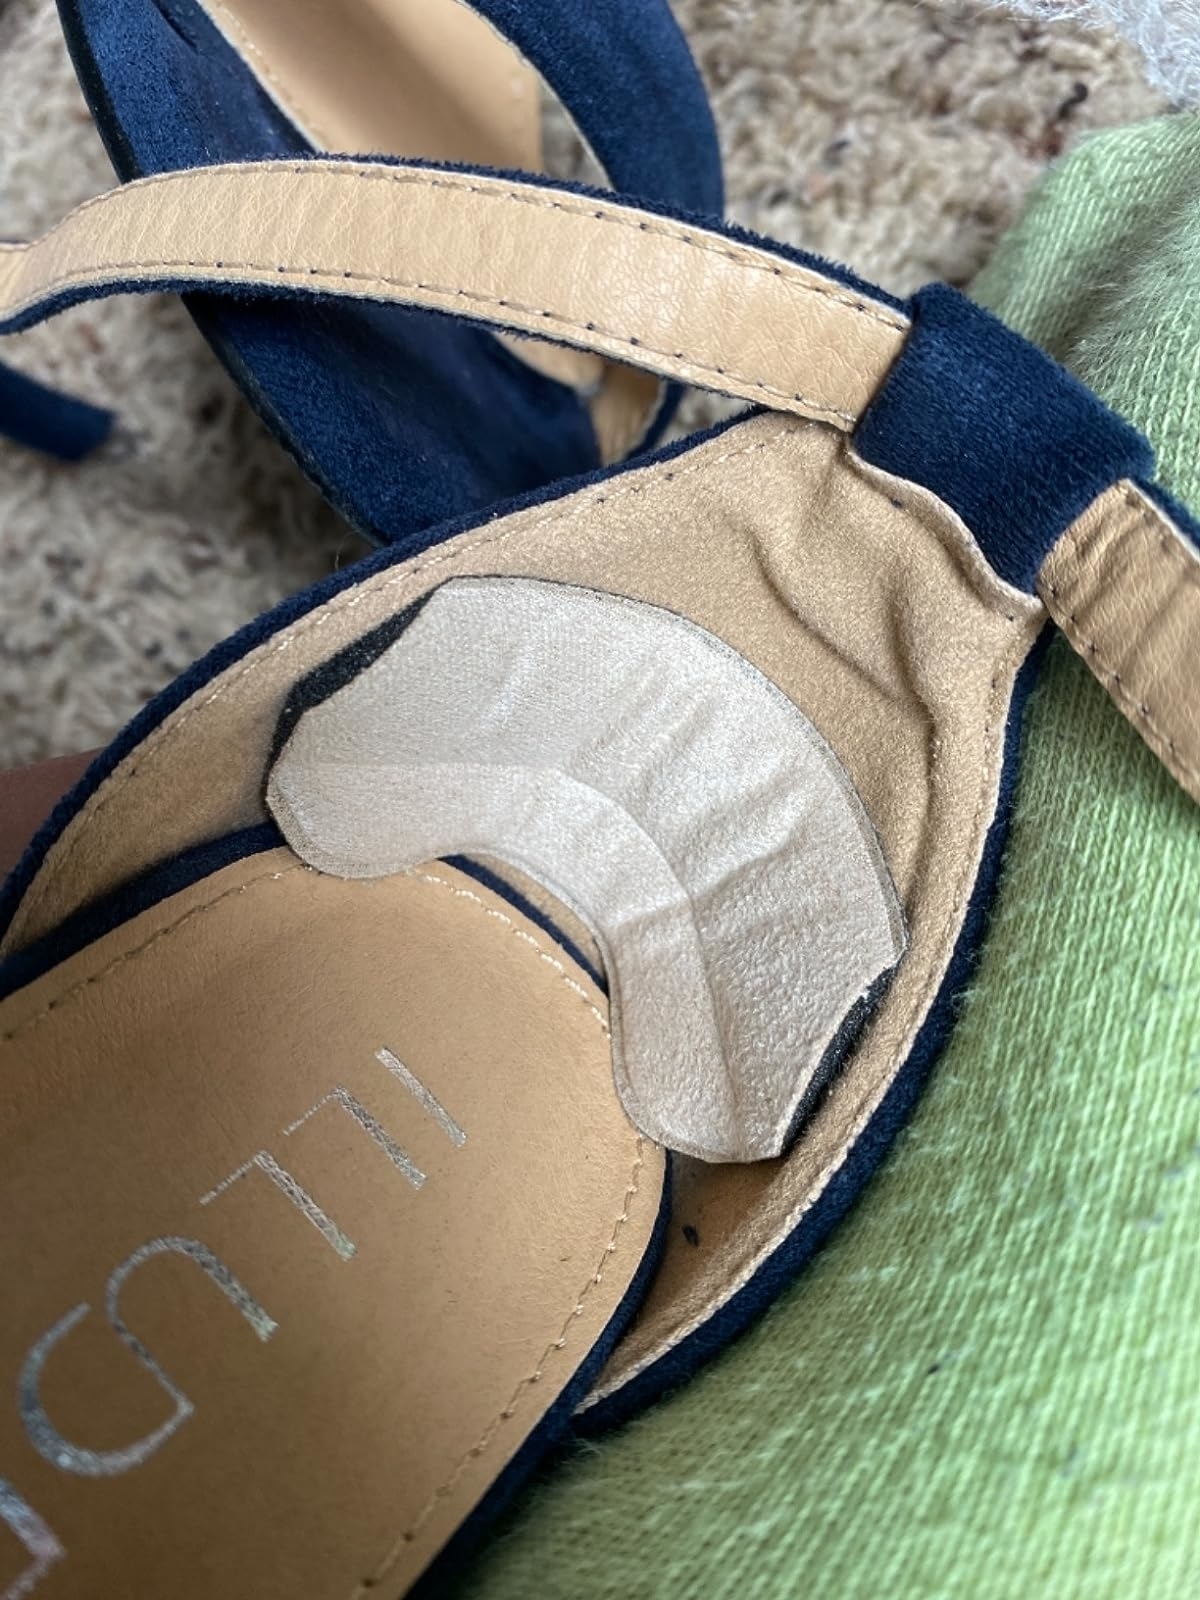 Reviewer image of heel cushion inside their shoe